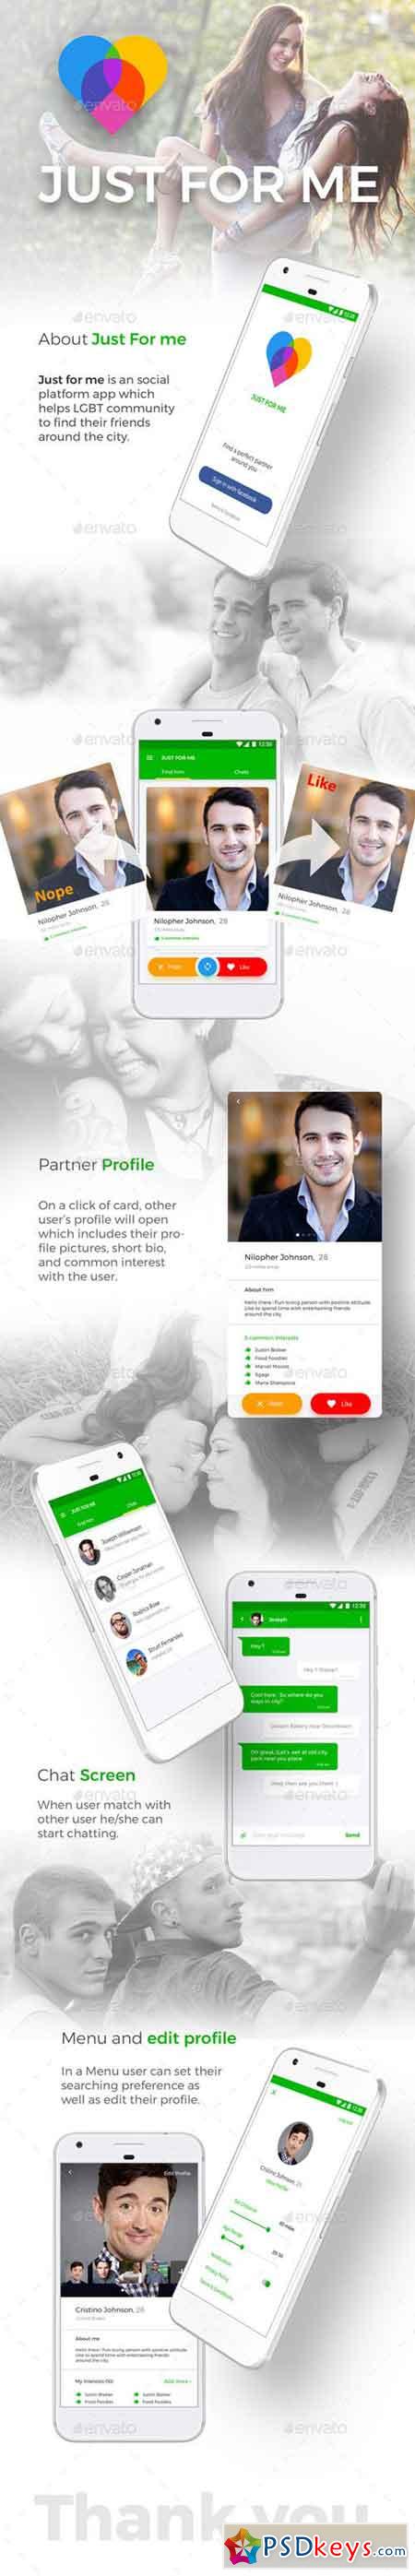 Dating App UI Kit like Tinder Just For Me for Android + iOS 20712407